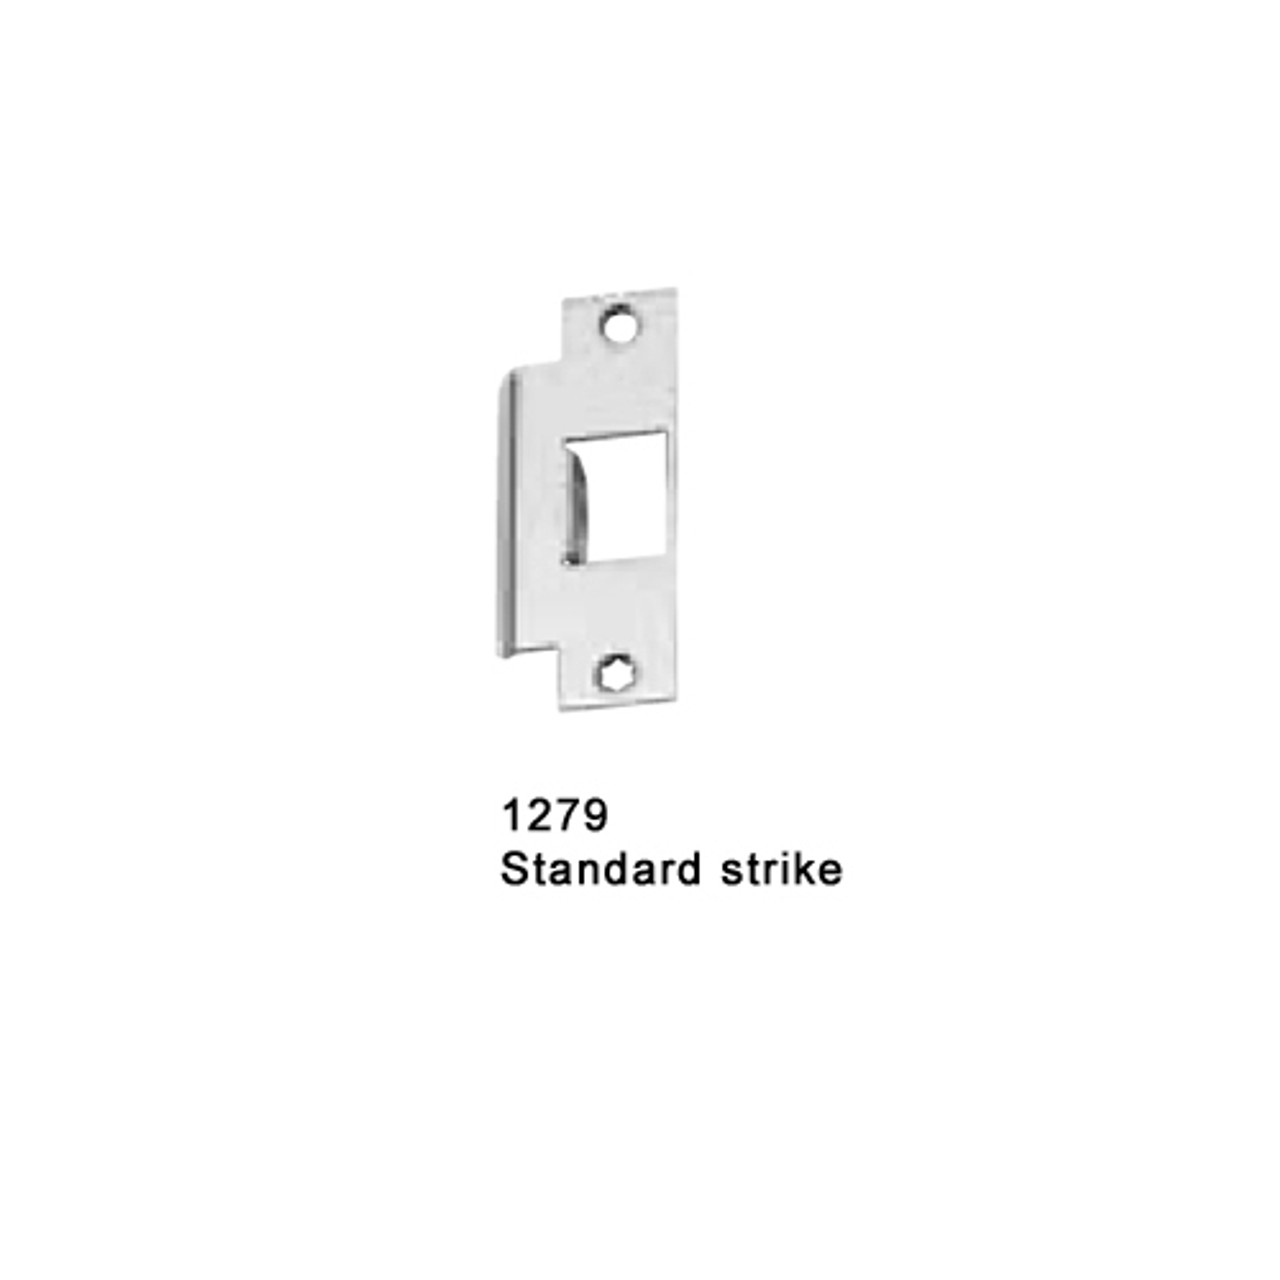 F-25-M-L-DT-Dane-US32D-4-RHR Falcon 25 Series Fire Rated Mortise Lock Devices 510L-DT Dane Lever Trim with Dummy Trim in Satin Stainless Steel